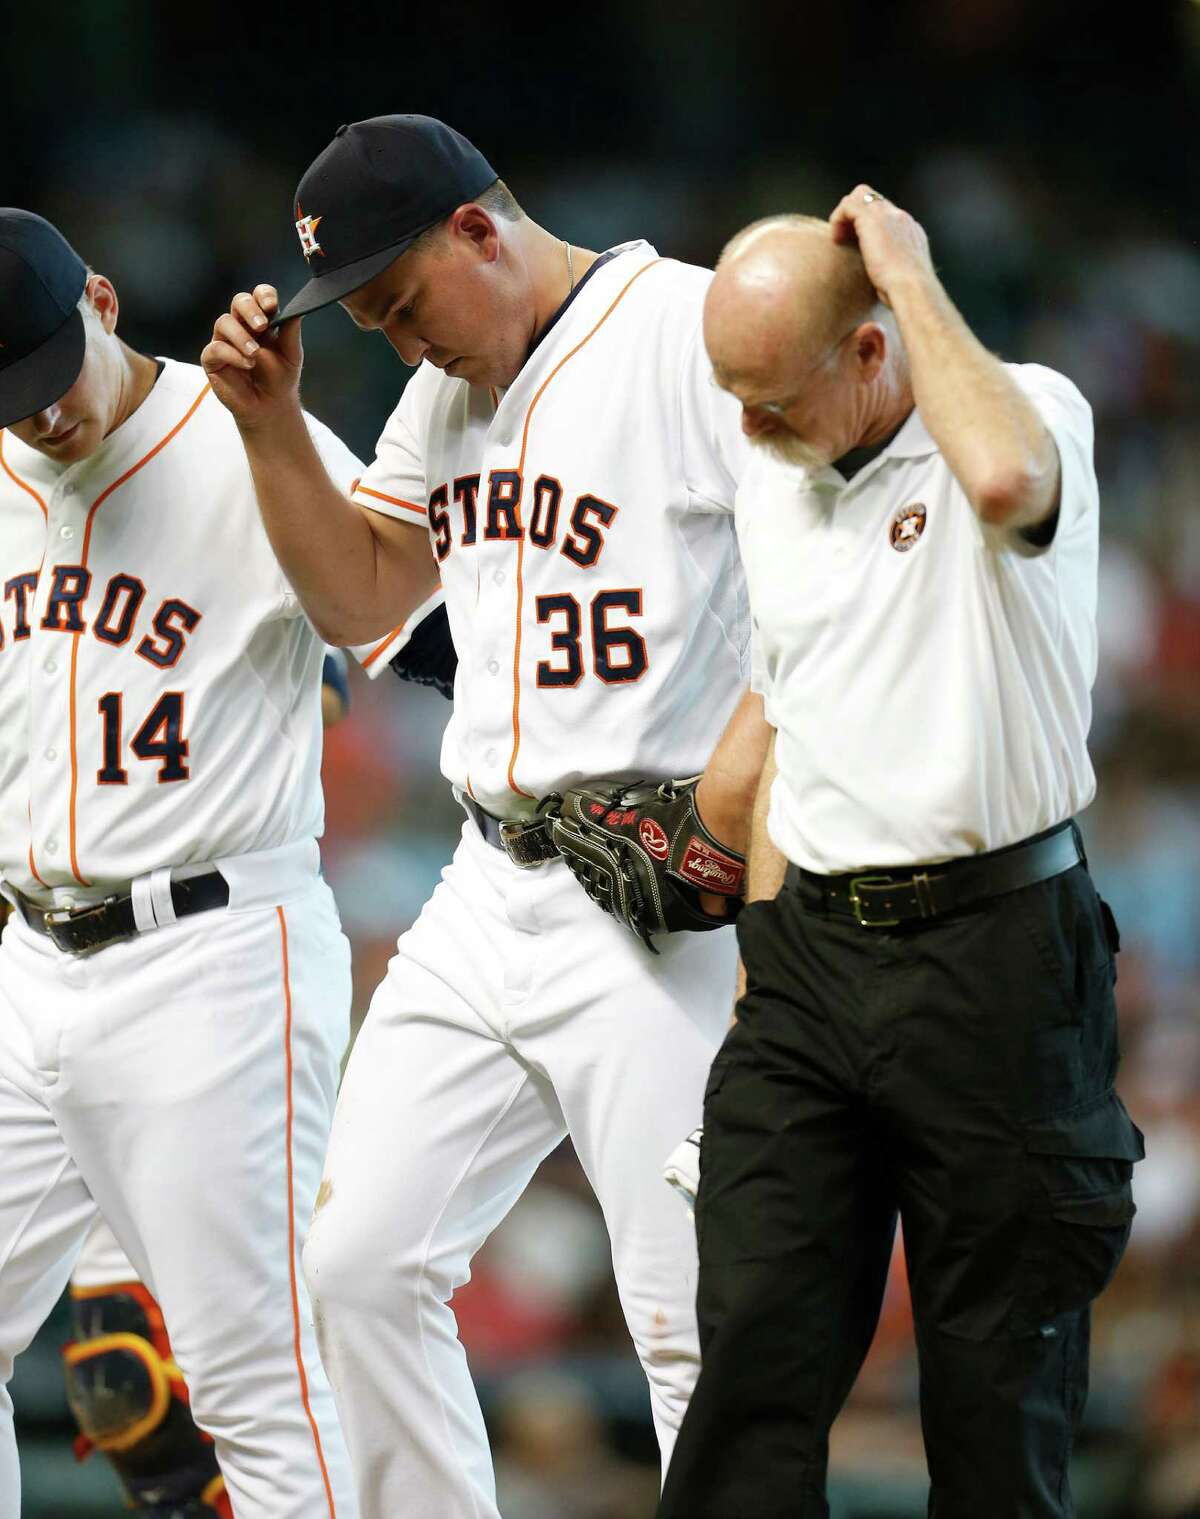 Reliever Will Harris is assisted after getting hit by a piece of Everth Cabrera's bat during a scoreless seventh inning against the Orioles that dropped Harris' ERA to 0.34.